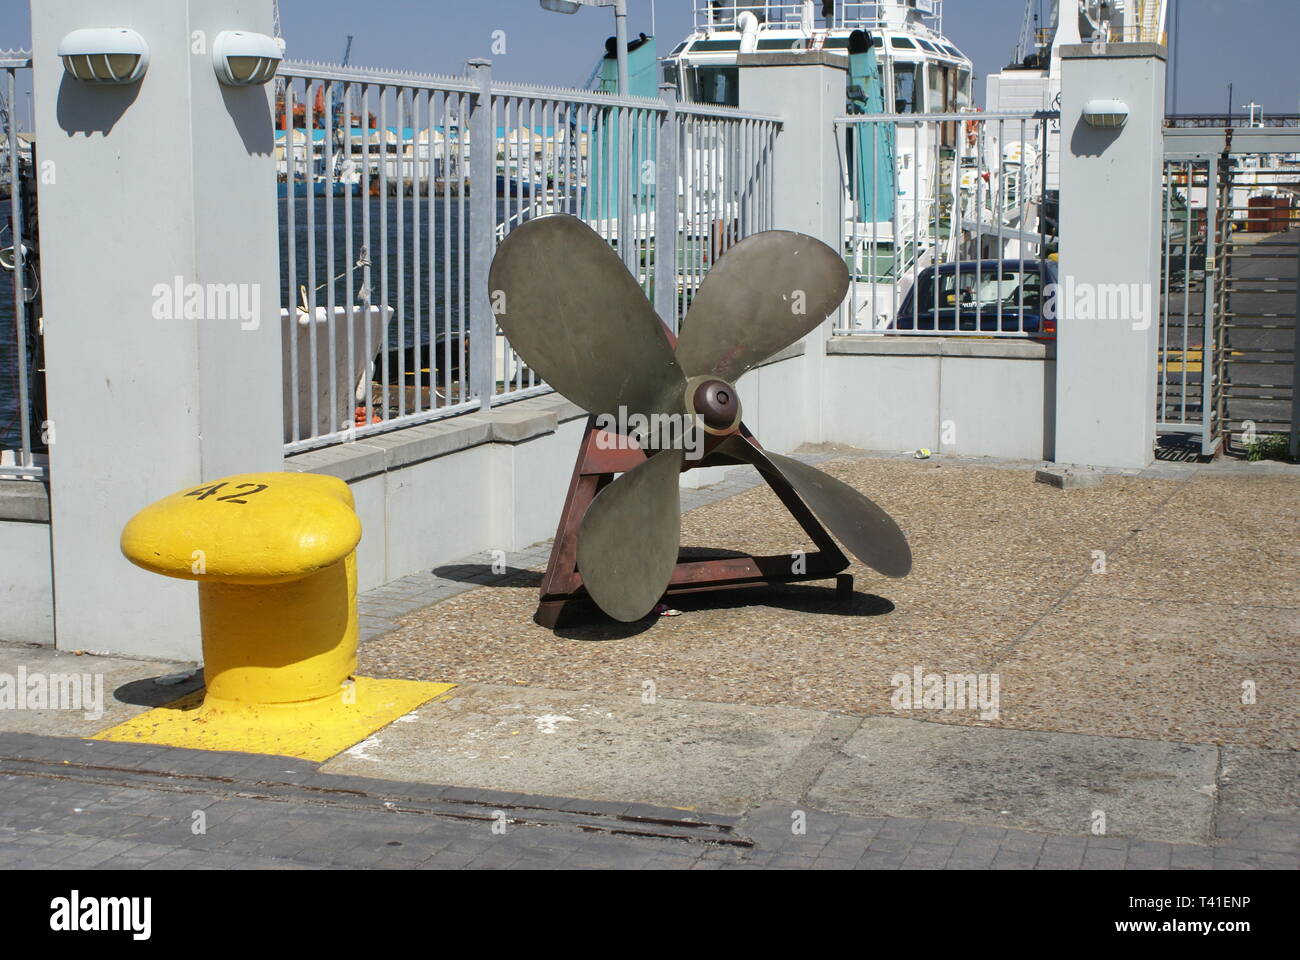 The art object is the propeller on the waterfront Victoria Basin. Cape Town. SA. Stock Photo